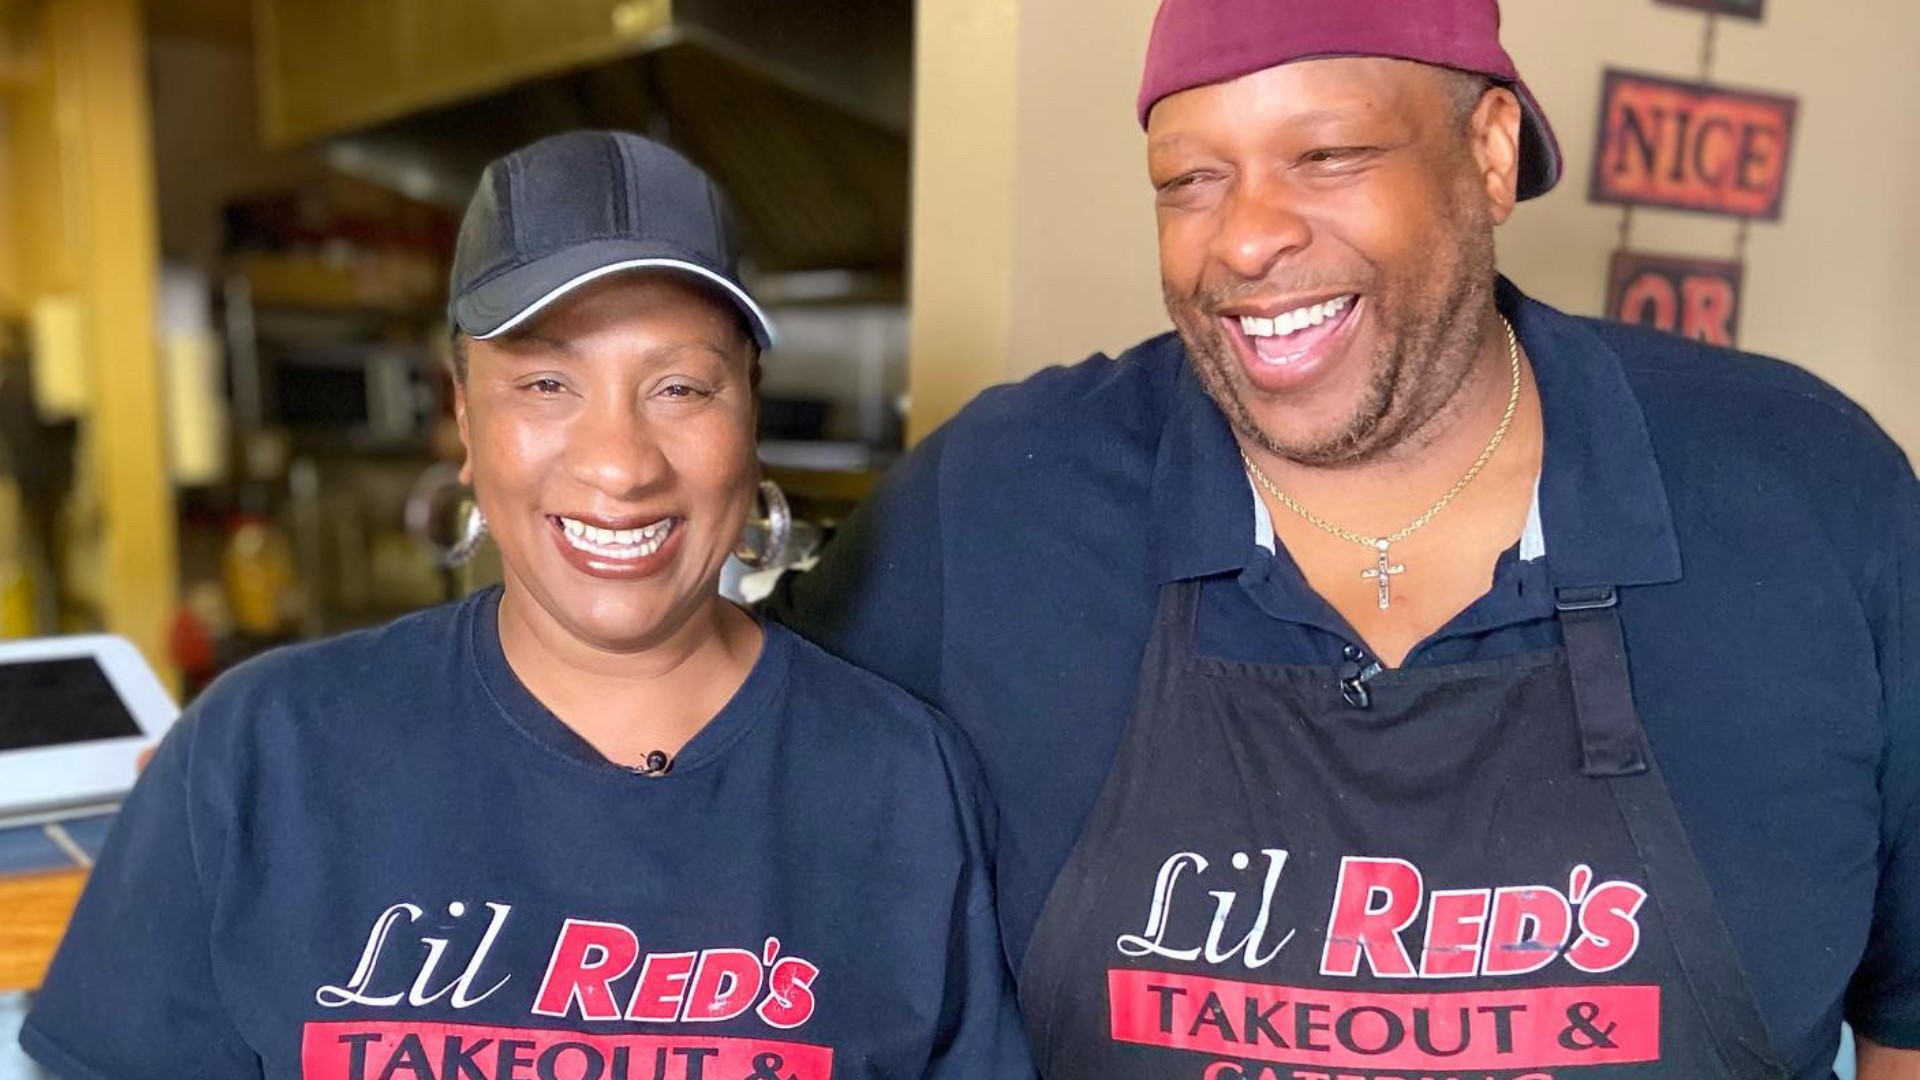 Located in Seattle's Columbia City neighborhood, the restaurant is run by Erasto "Red" Jackson and his wife Lil. #k5evening